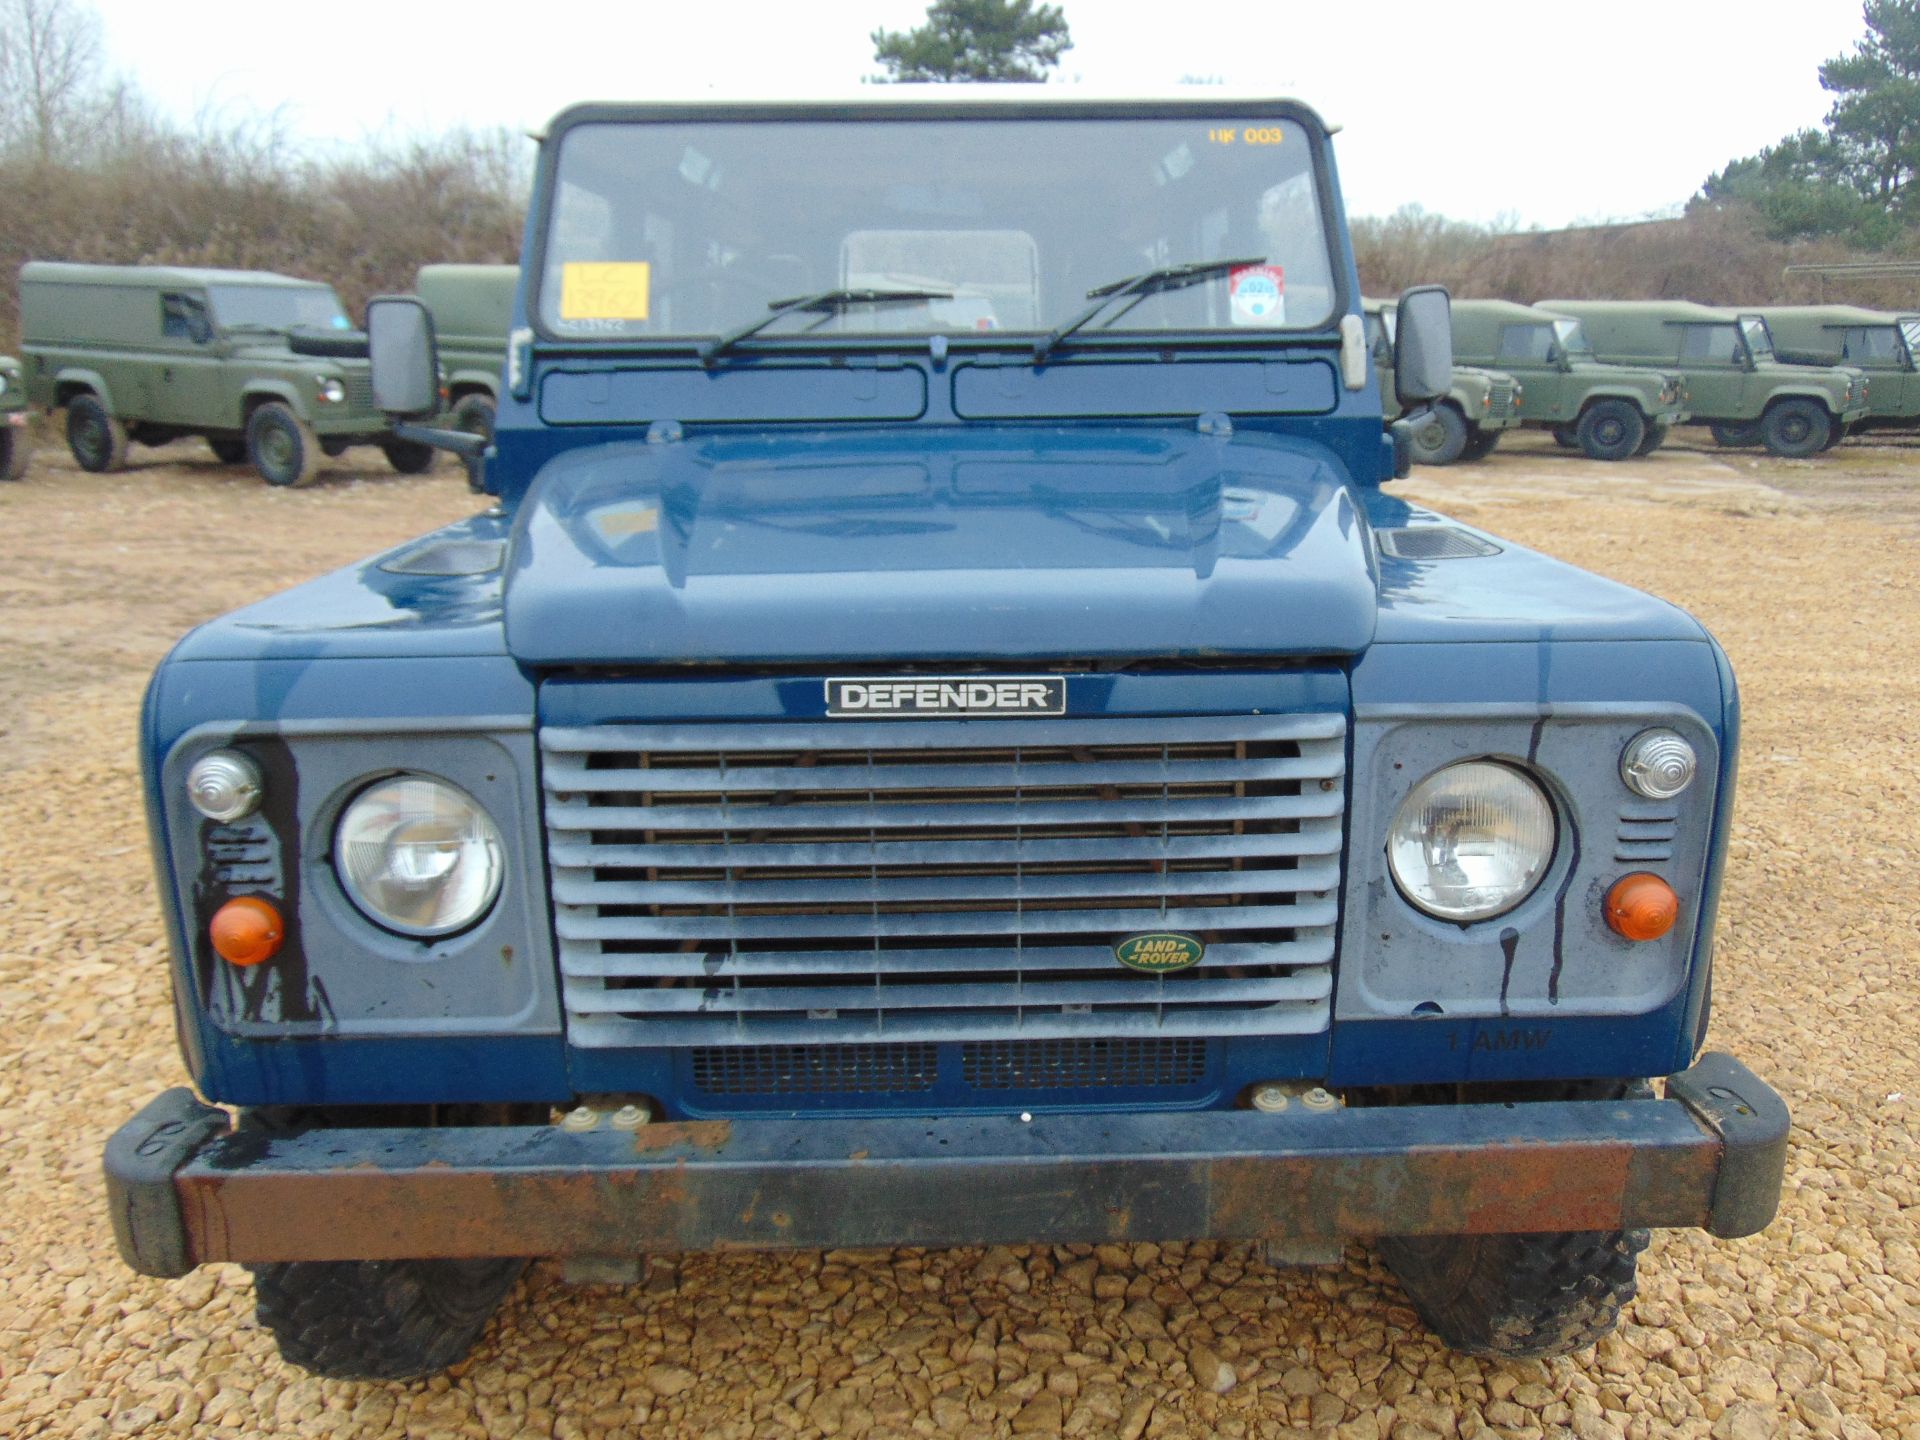 2002 Land Rover 110 TD5 Station Wagon - Image 2 of 20